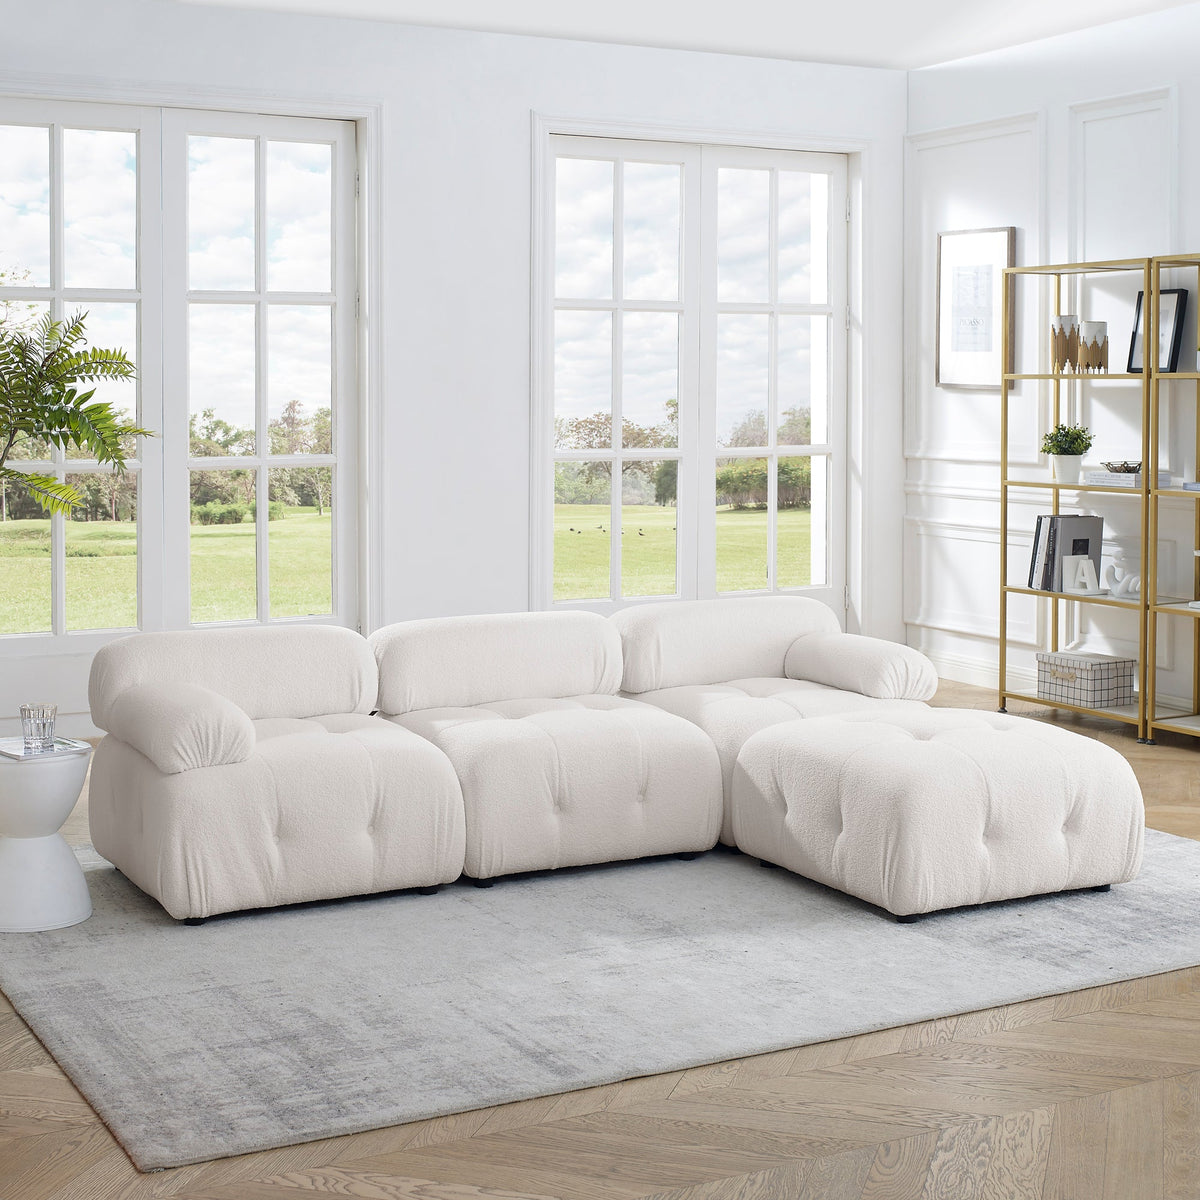 Modular Sectional Sofa, Button Tufted Designed and DIY Combination,L